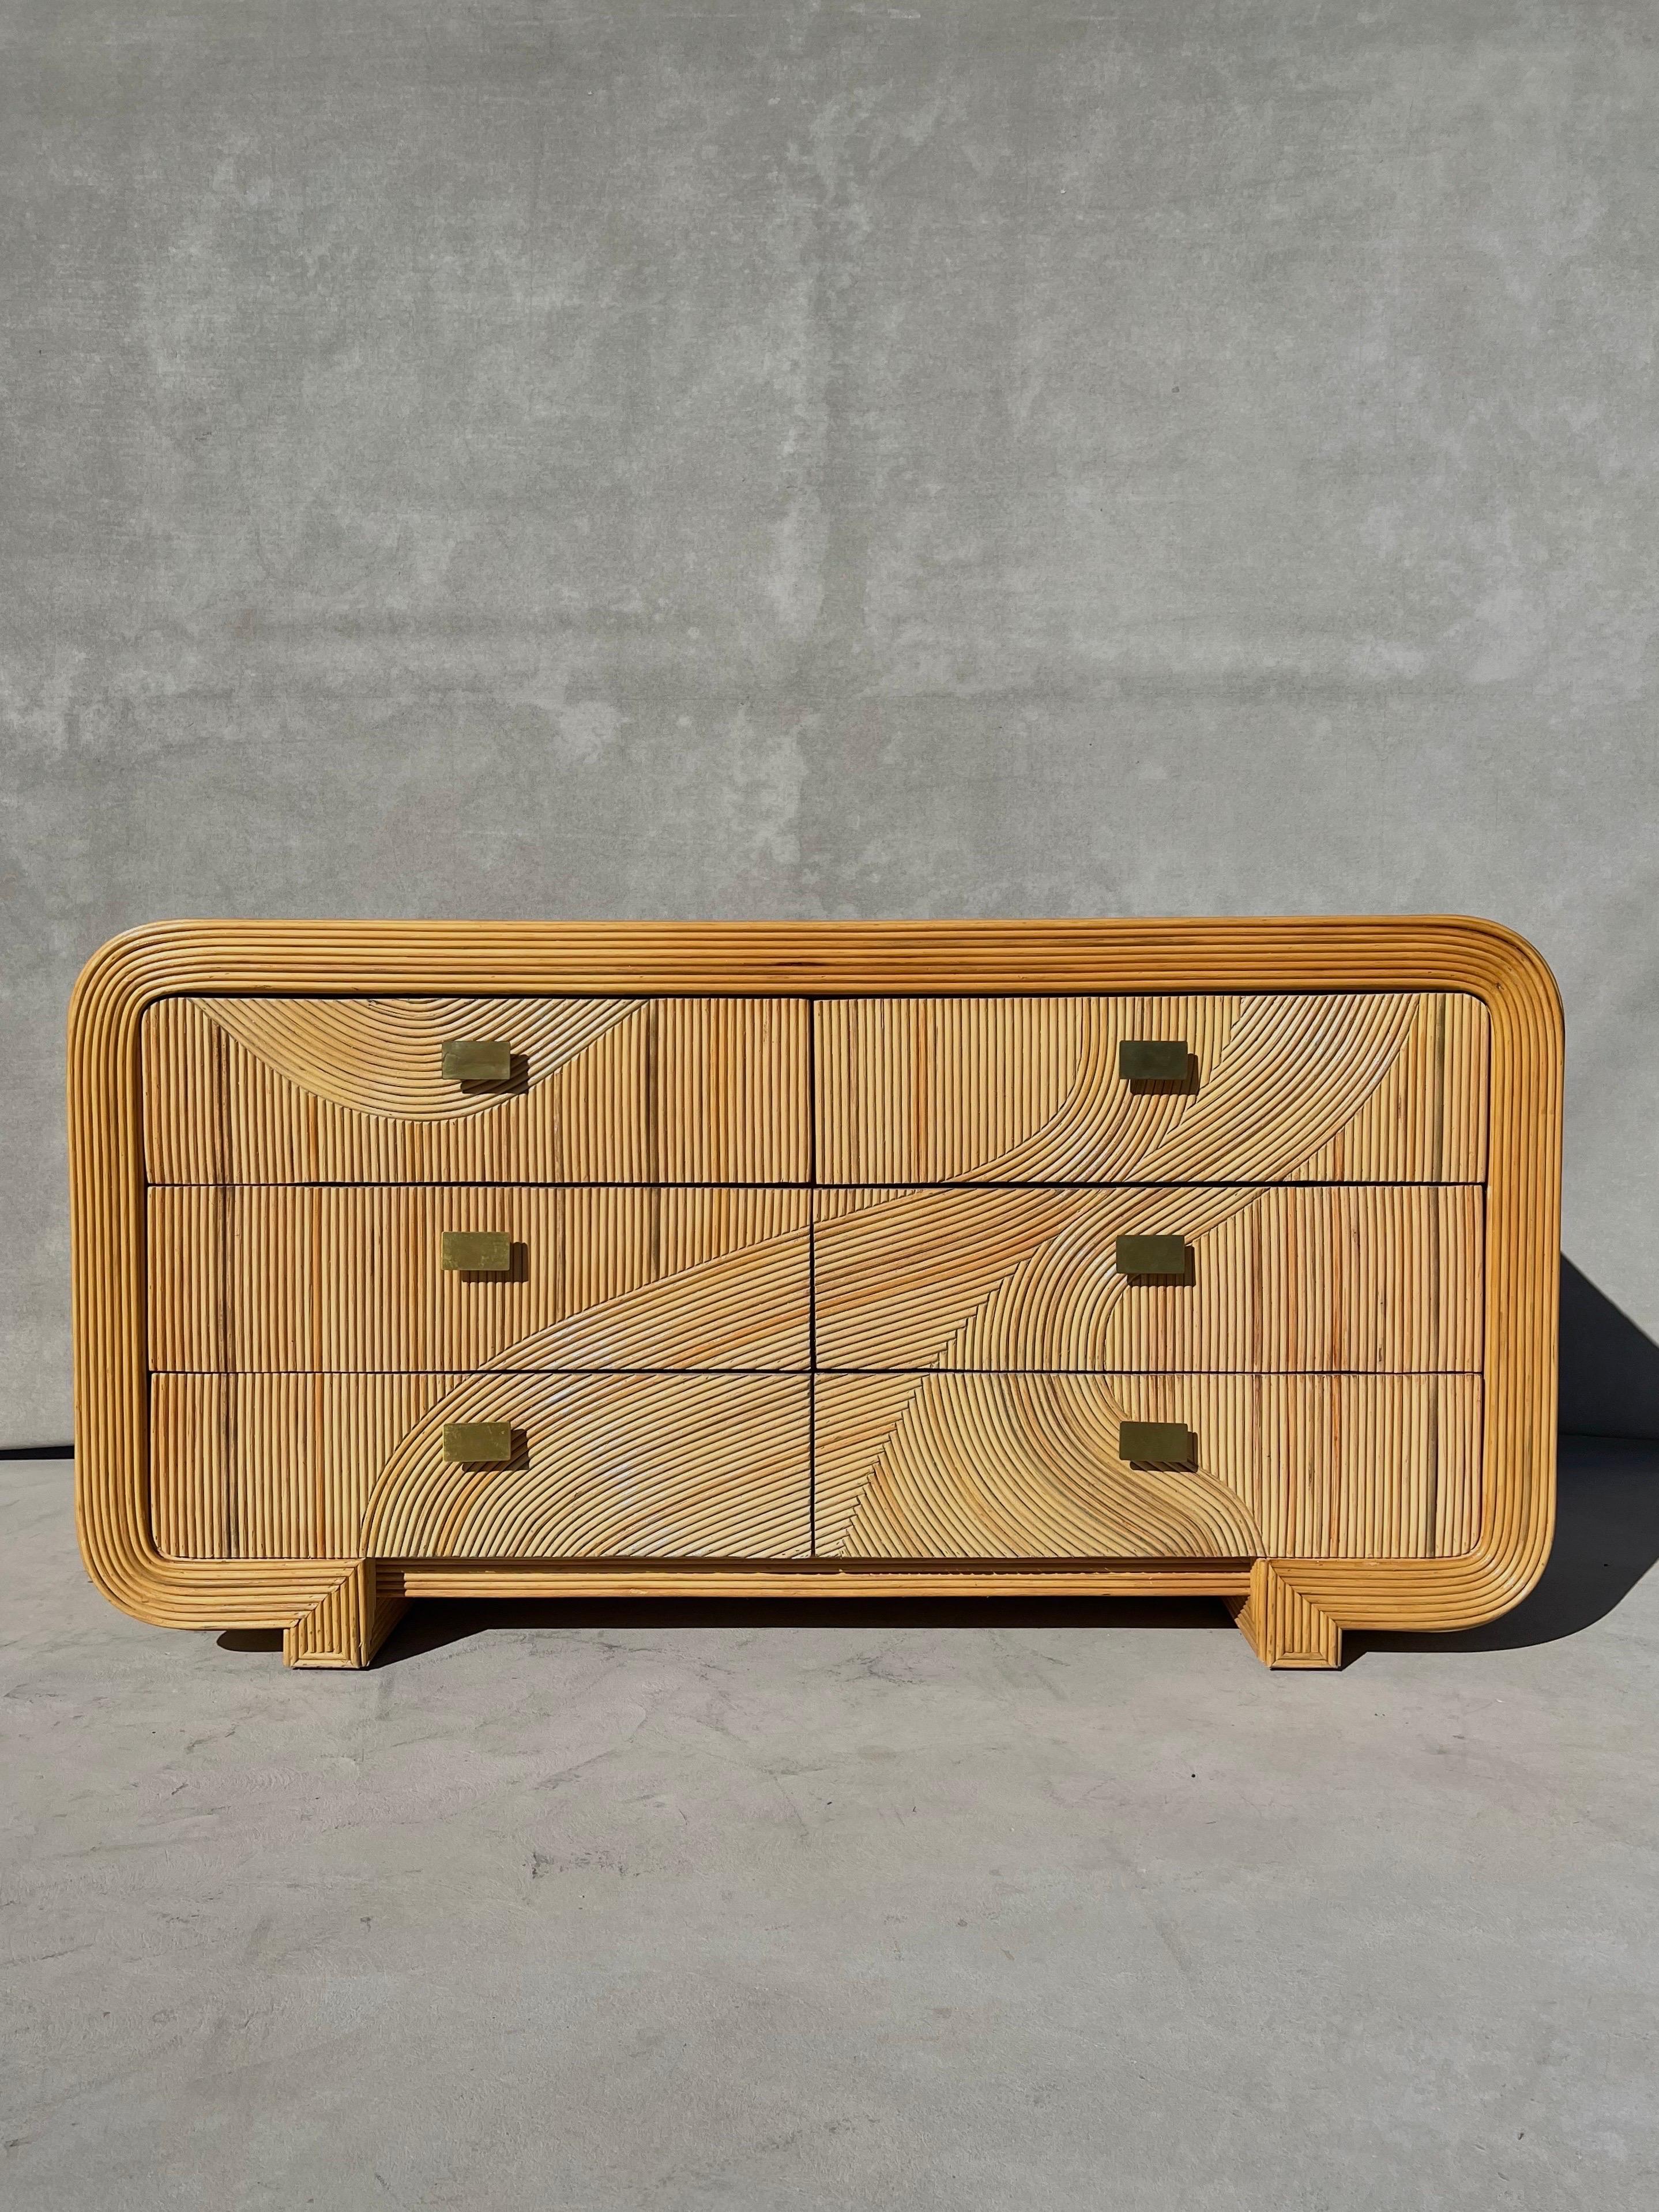 Gabriella Crespi attributed pencil reed and brass six drawer dresser, credenza or chest of drawers

A one of a kind piece- intricately handcrafted with curved and bent pencil reed in a variety of soft, welcoming colors. Colors of warm beiges, soft